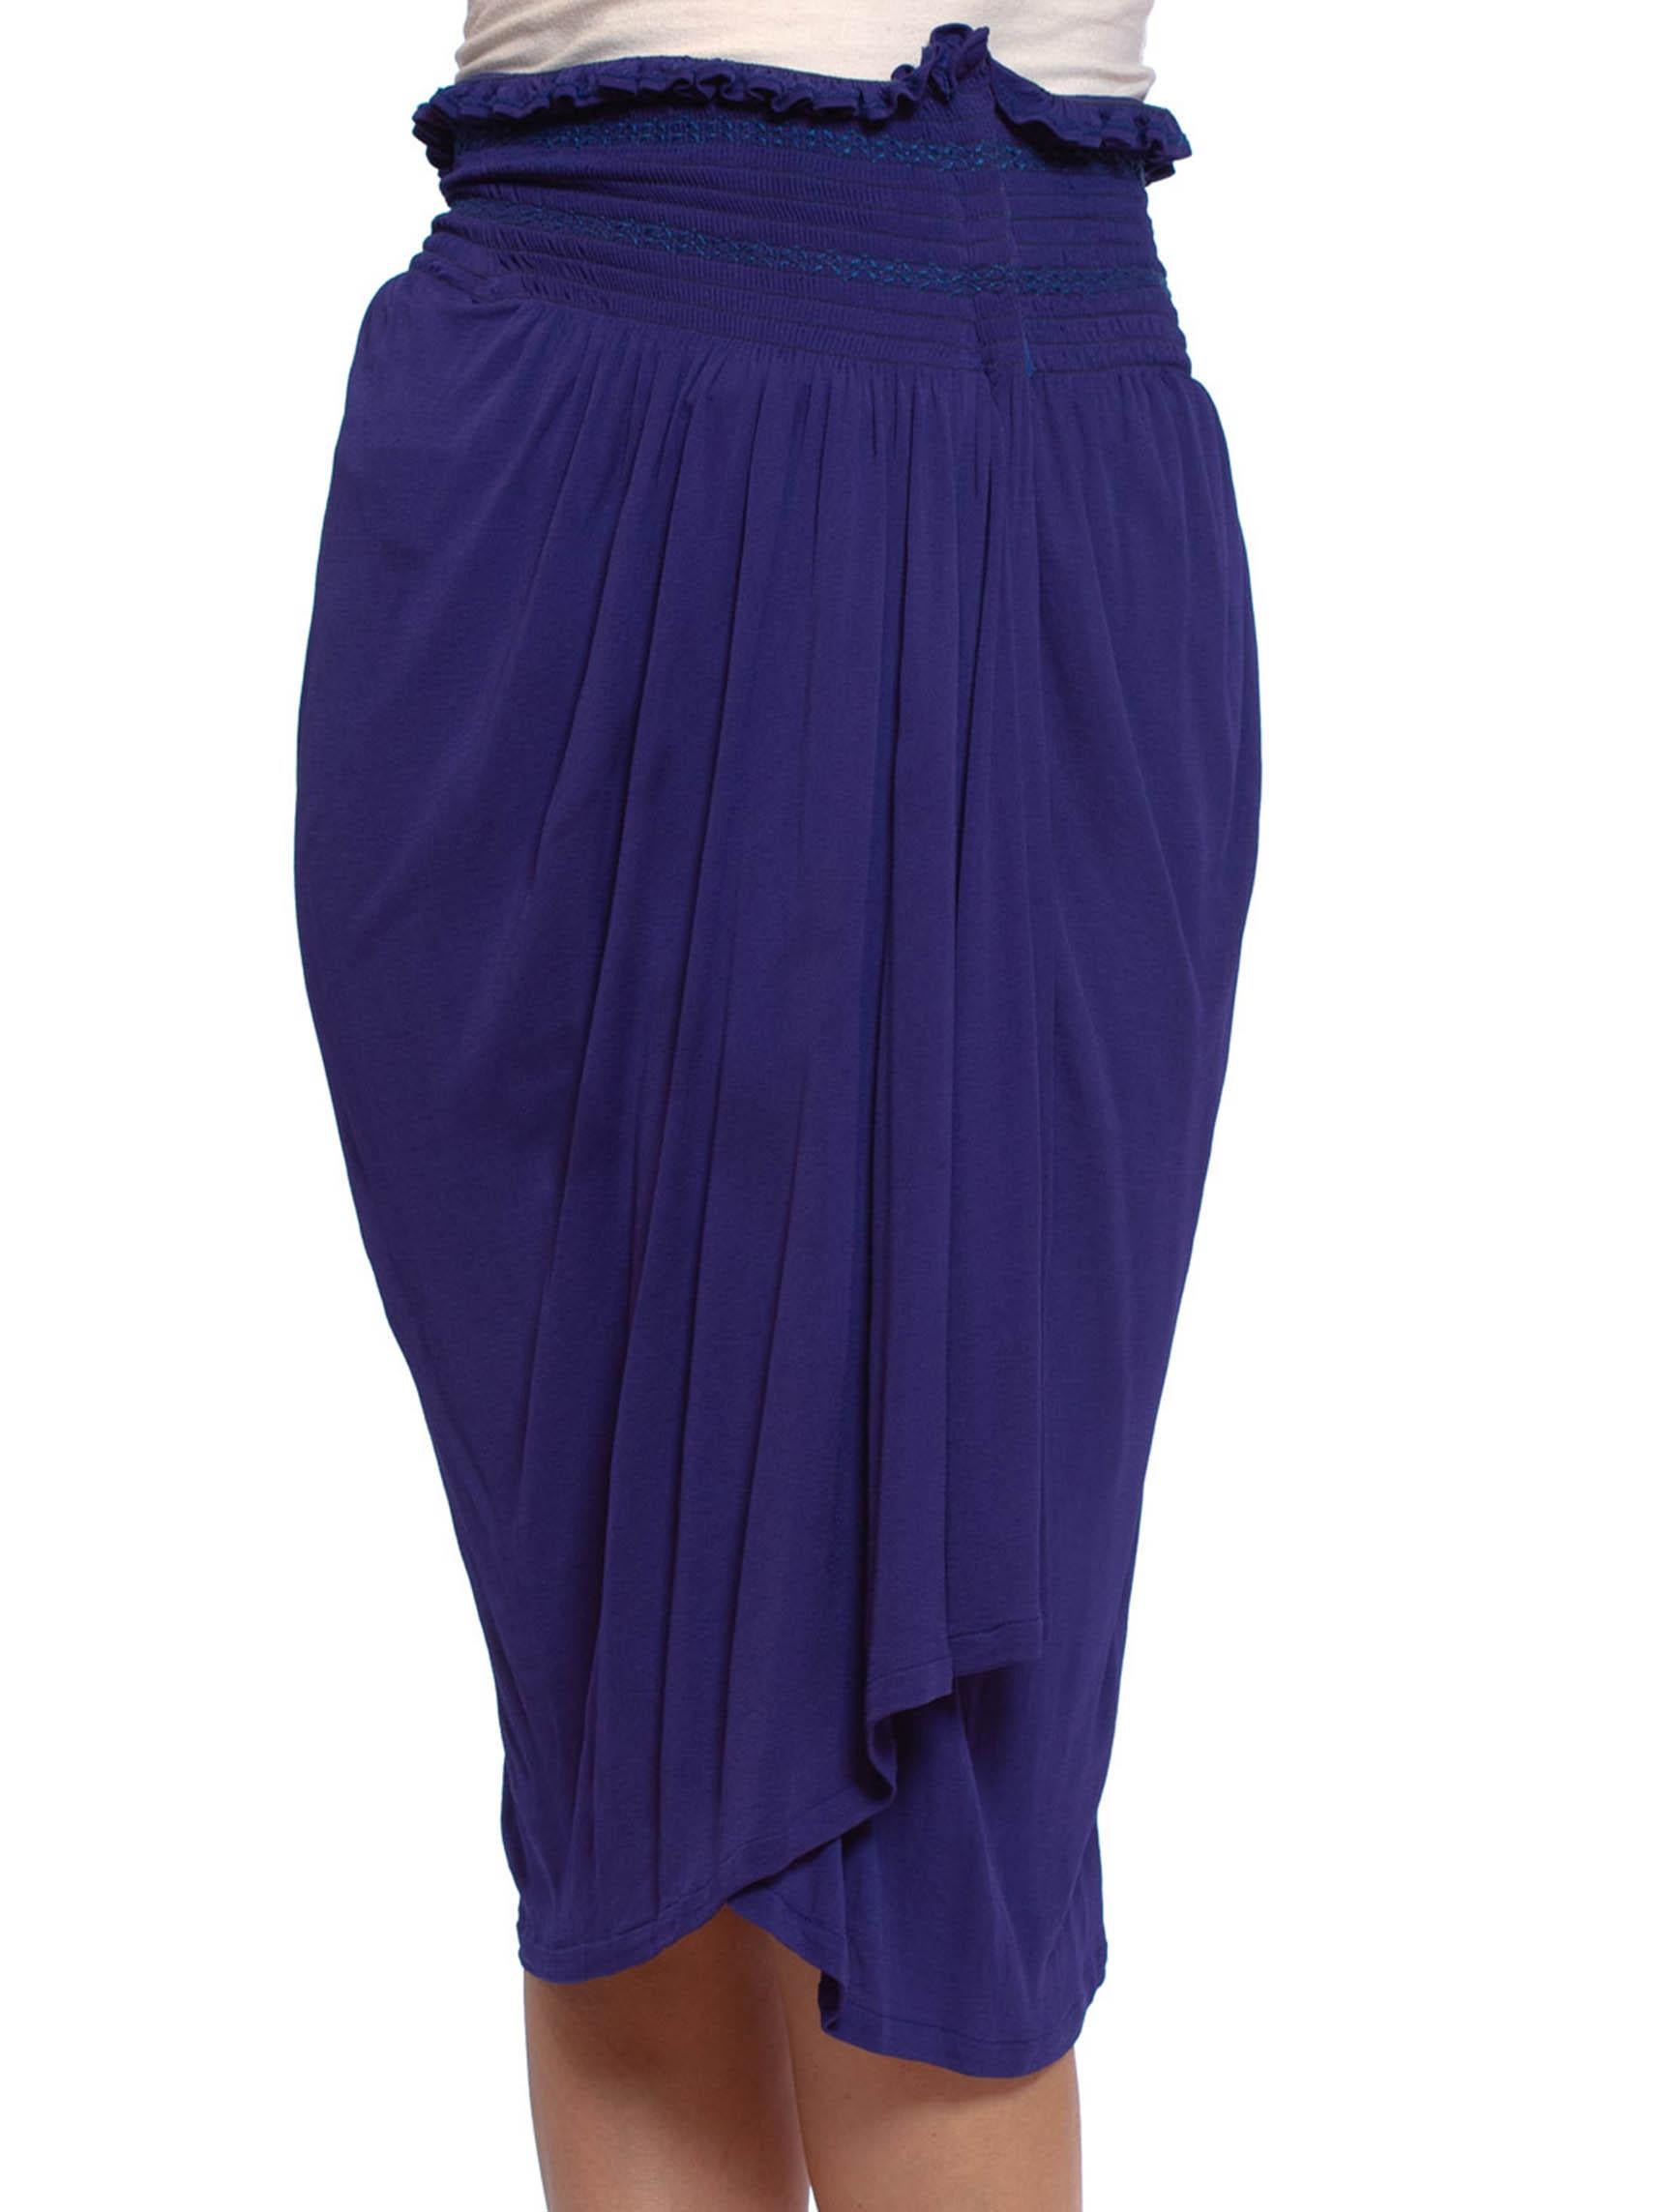 1990S KENZO Purple Blue Viscose Jersey Wrap Skirt With Smocked Waist For Sale 4